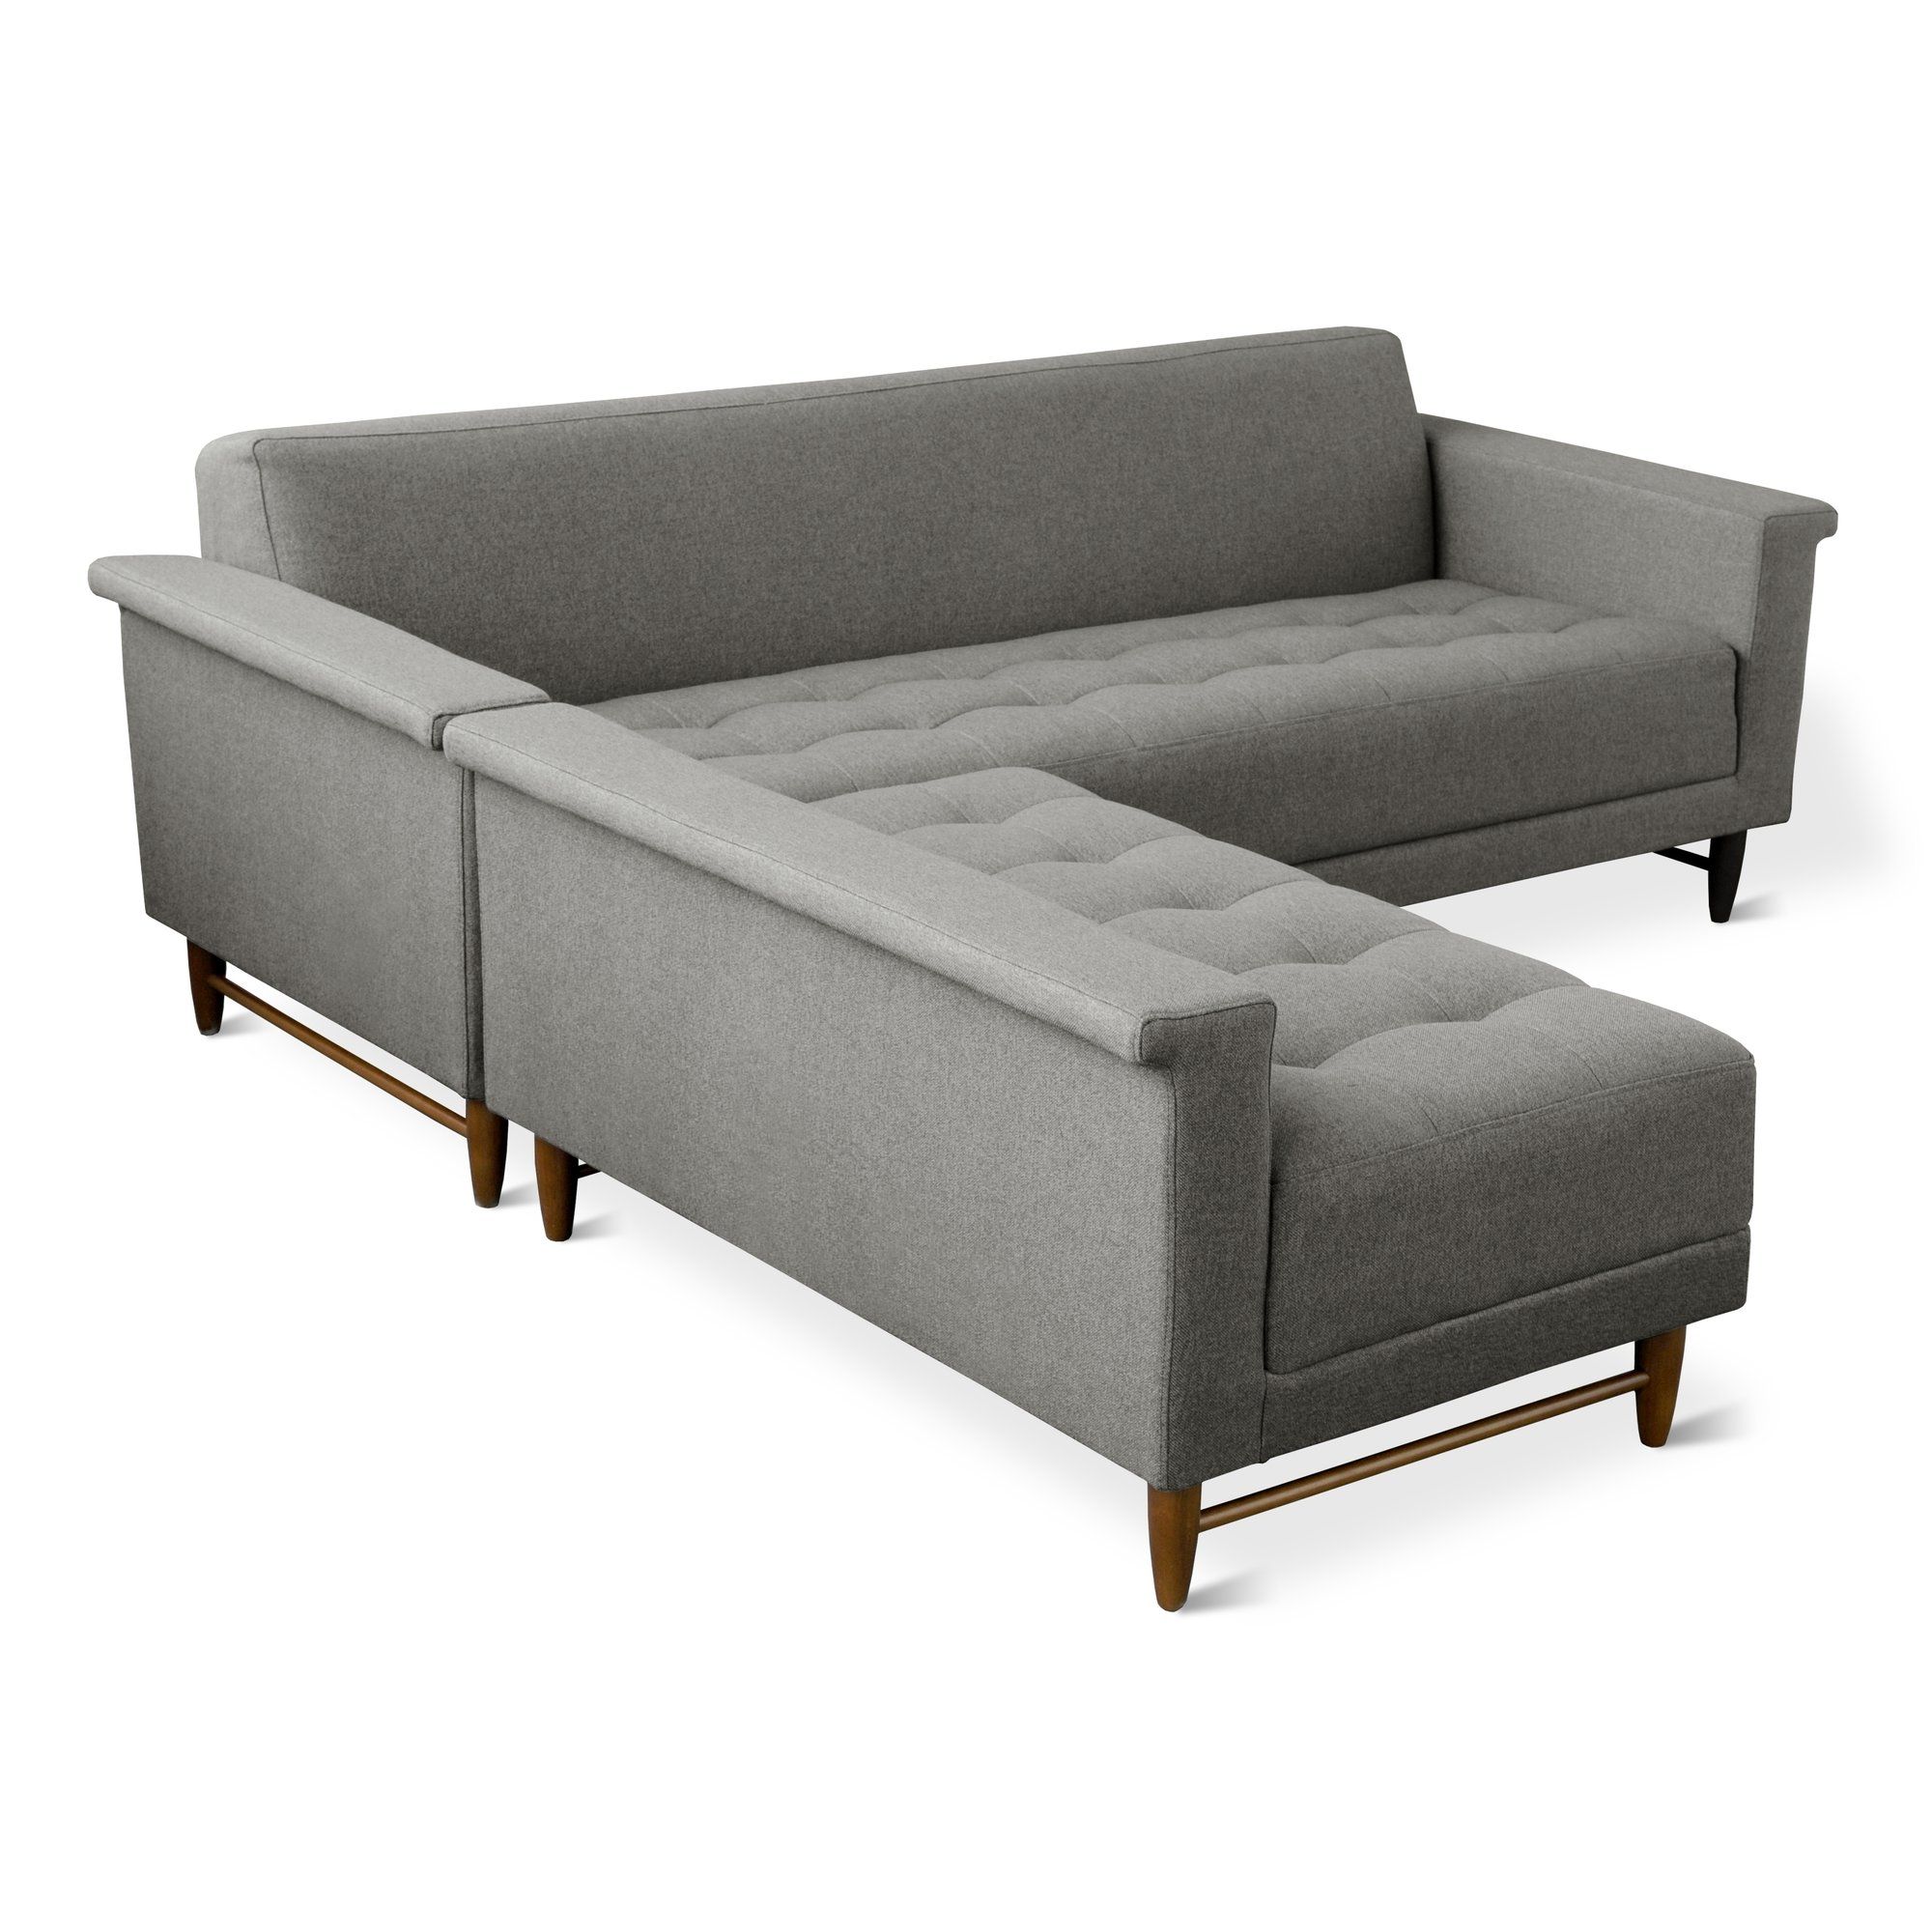 Harbord Loft Bi Sectional Reviews Allmodern Pertaining To Bisectional Sofa (View 11 of 15)